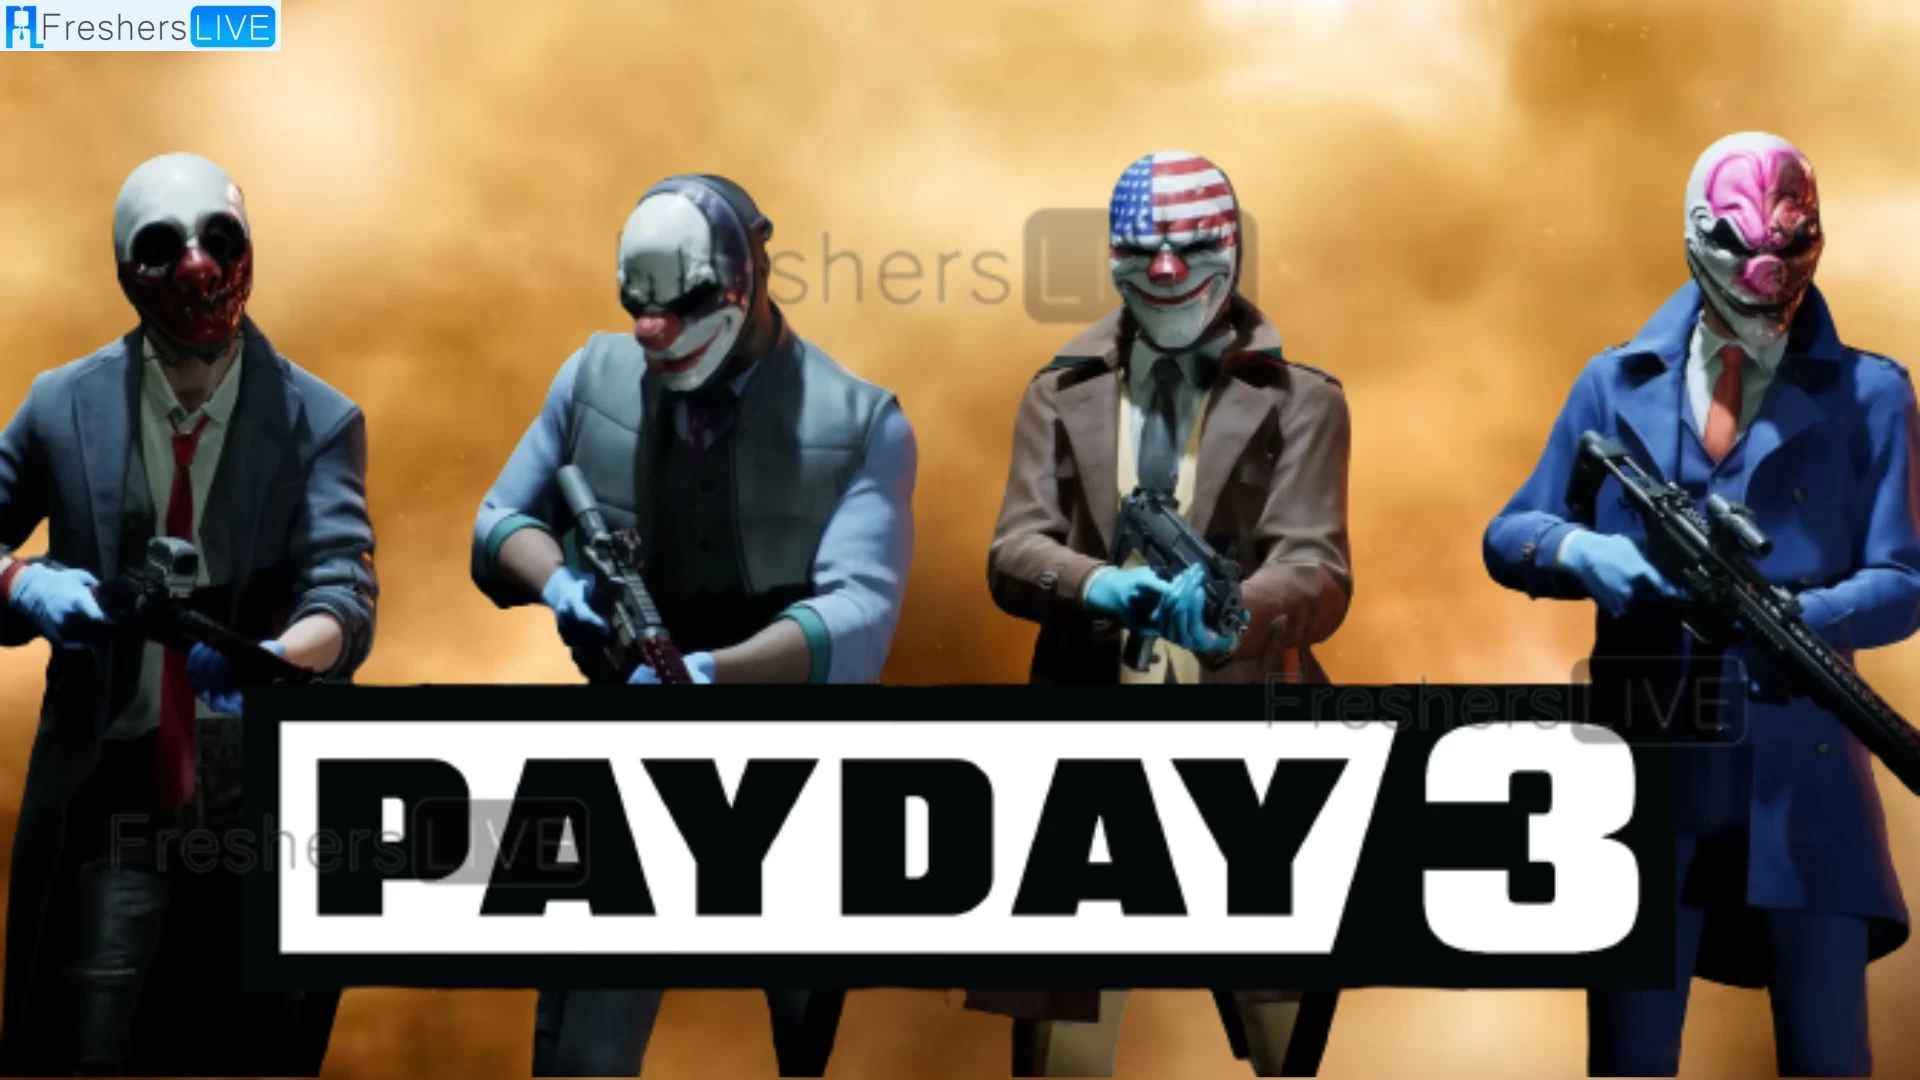 Payday 3 Voice Chat: Where is the Voice Chat in Payday 3?